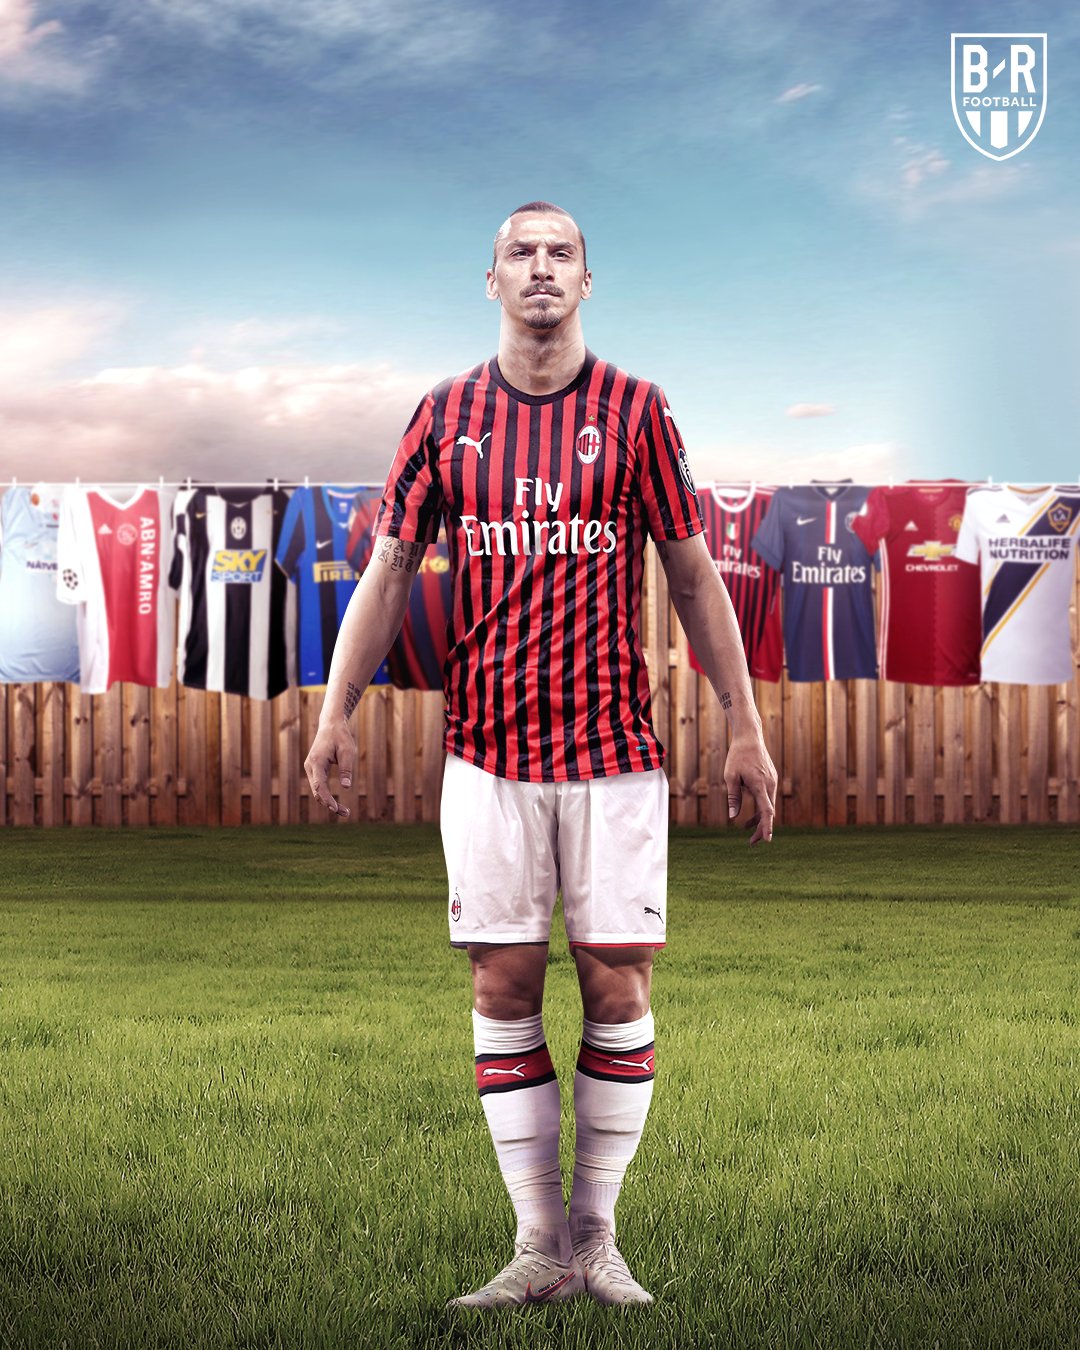 Free download BR Football on Twitter Zlatan Ibrahimovic has agreed a deal to [1080x1350] for your Desktop, Mobile & Tablet. Explore Ibrahimovic Milan Wallpaper. Ibrahimovic Wallpaper, Ibrahimovic Wallpaper, Zlatan Ibrahimovic Wallpaper